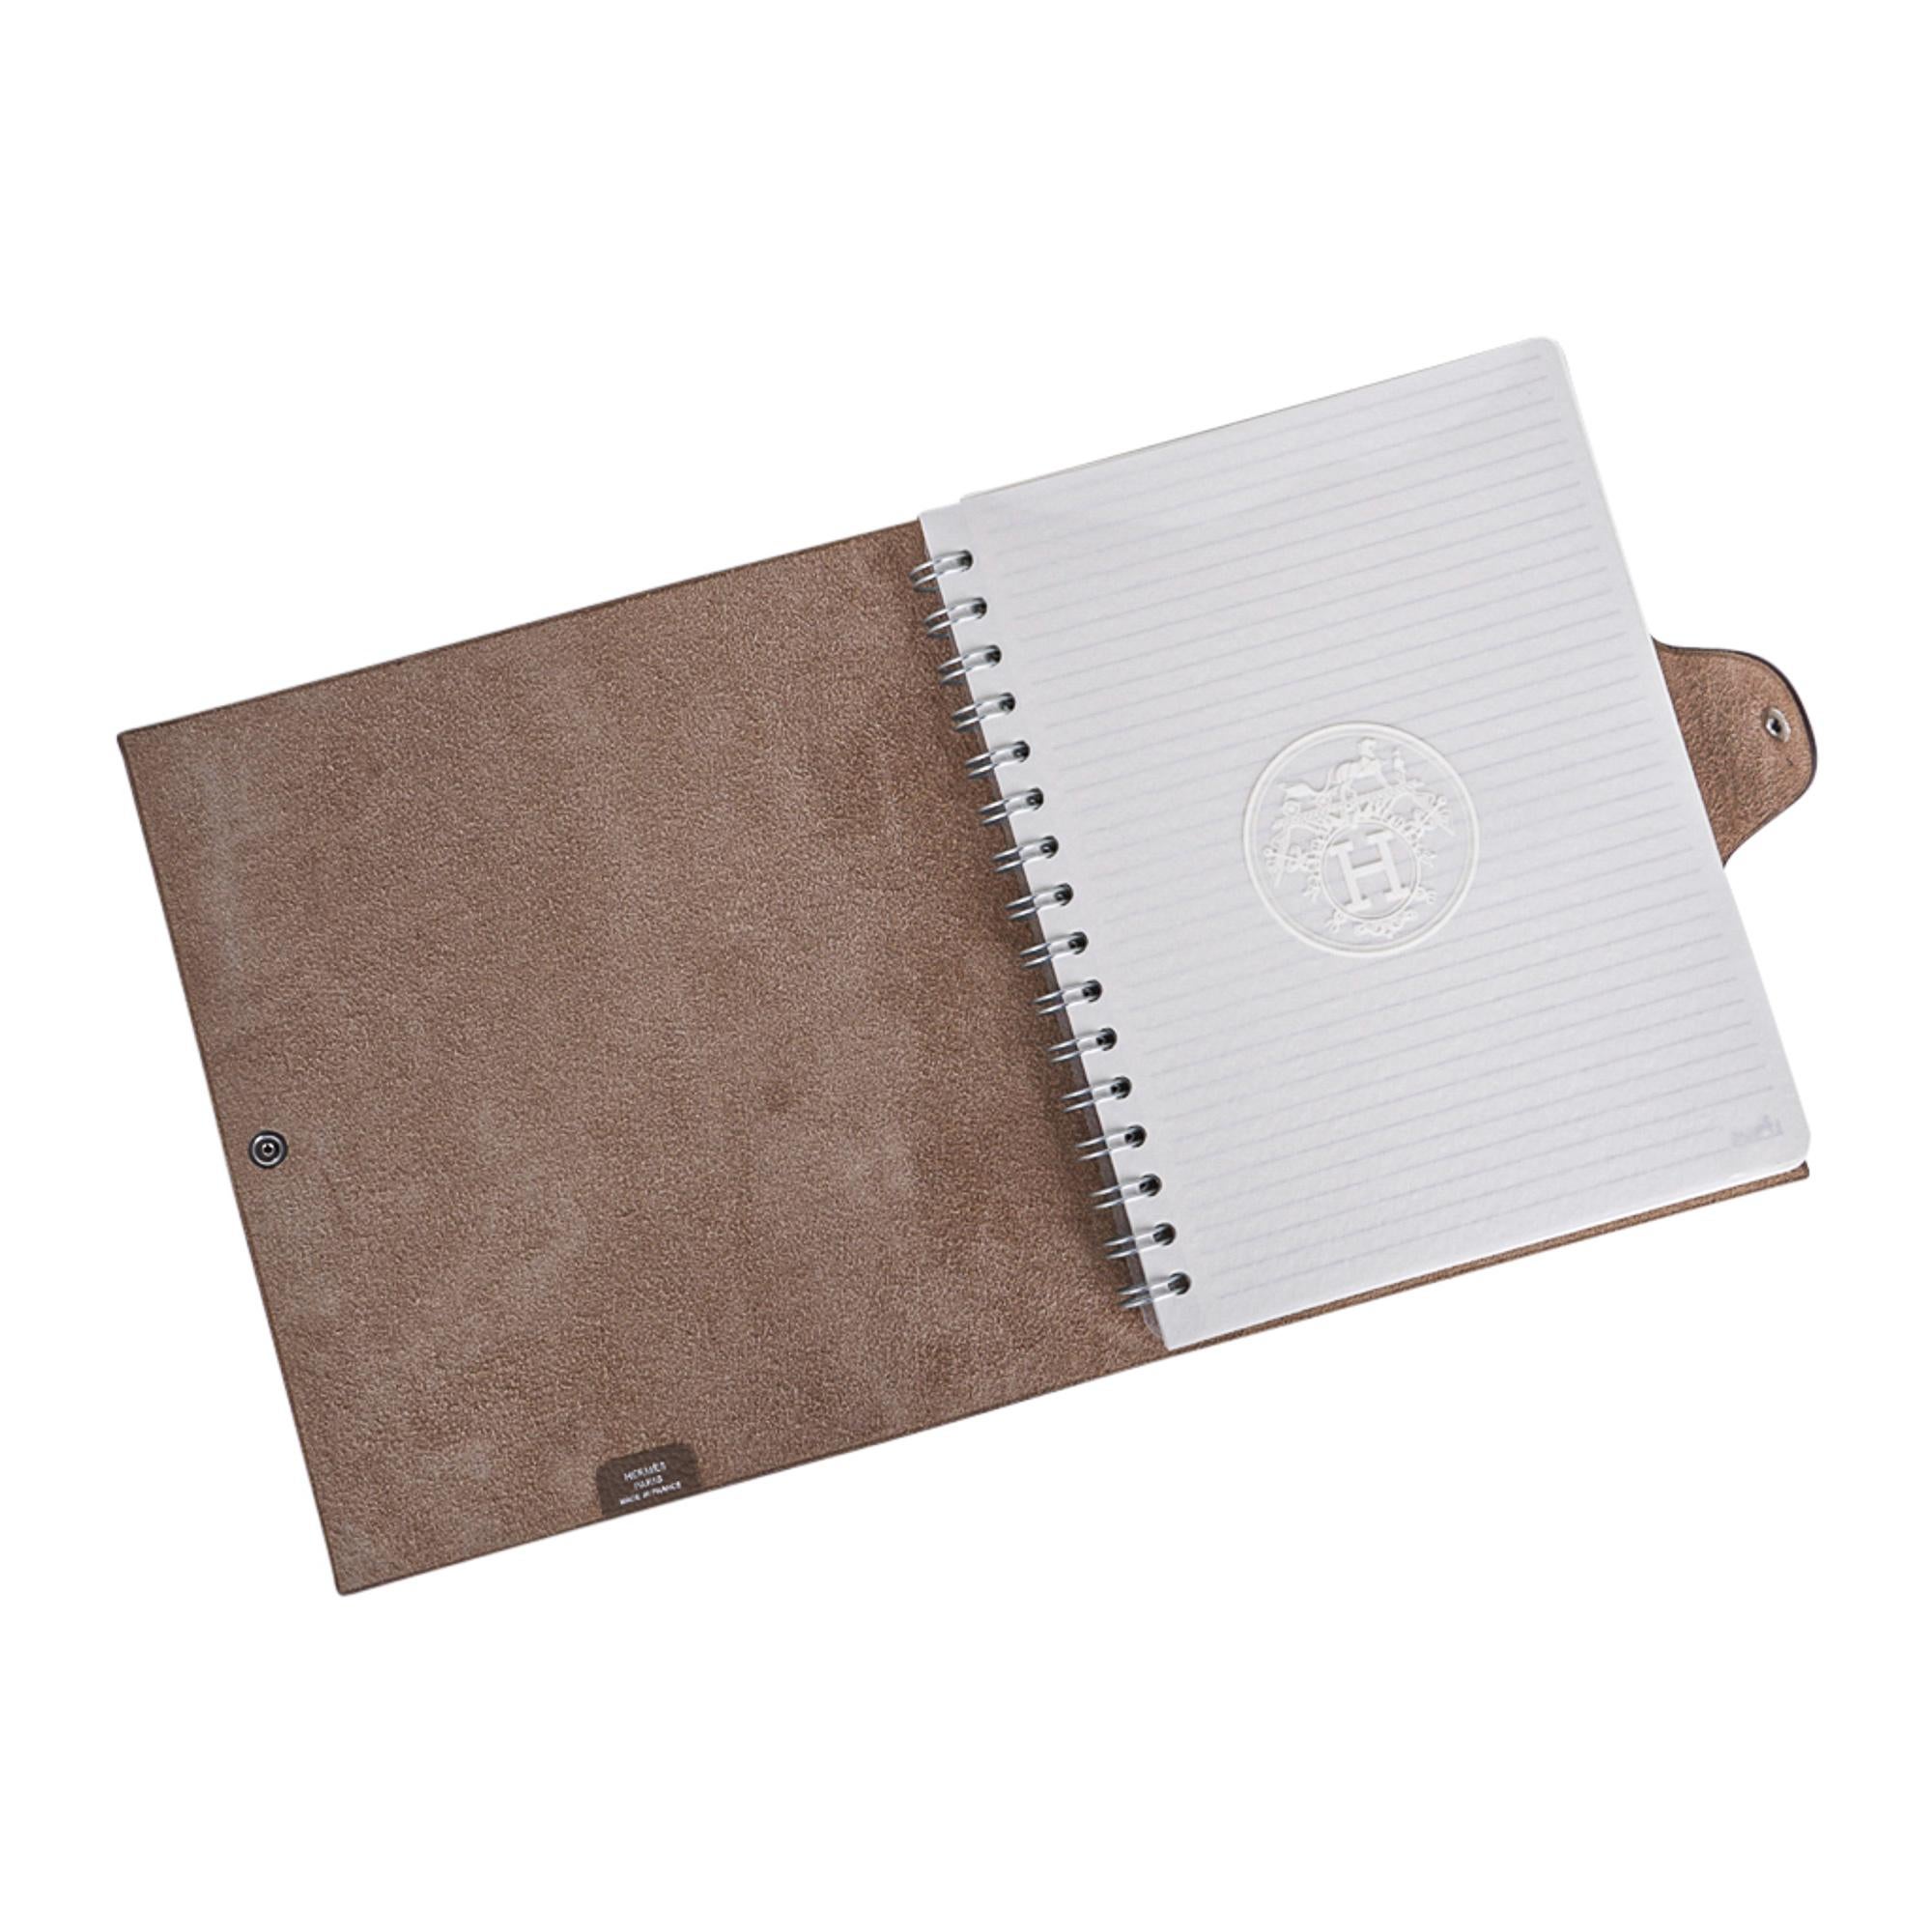 Brown Hermes Ulysse Notebook Cover Etoupe MM Model with Refill New